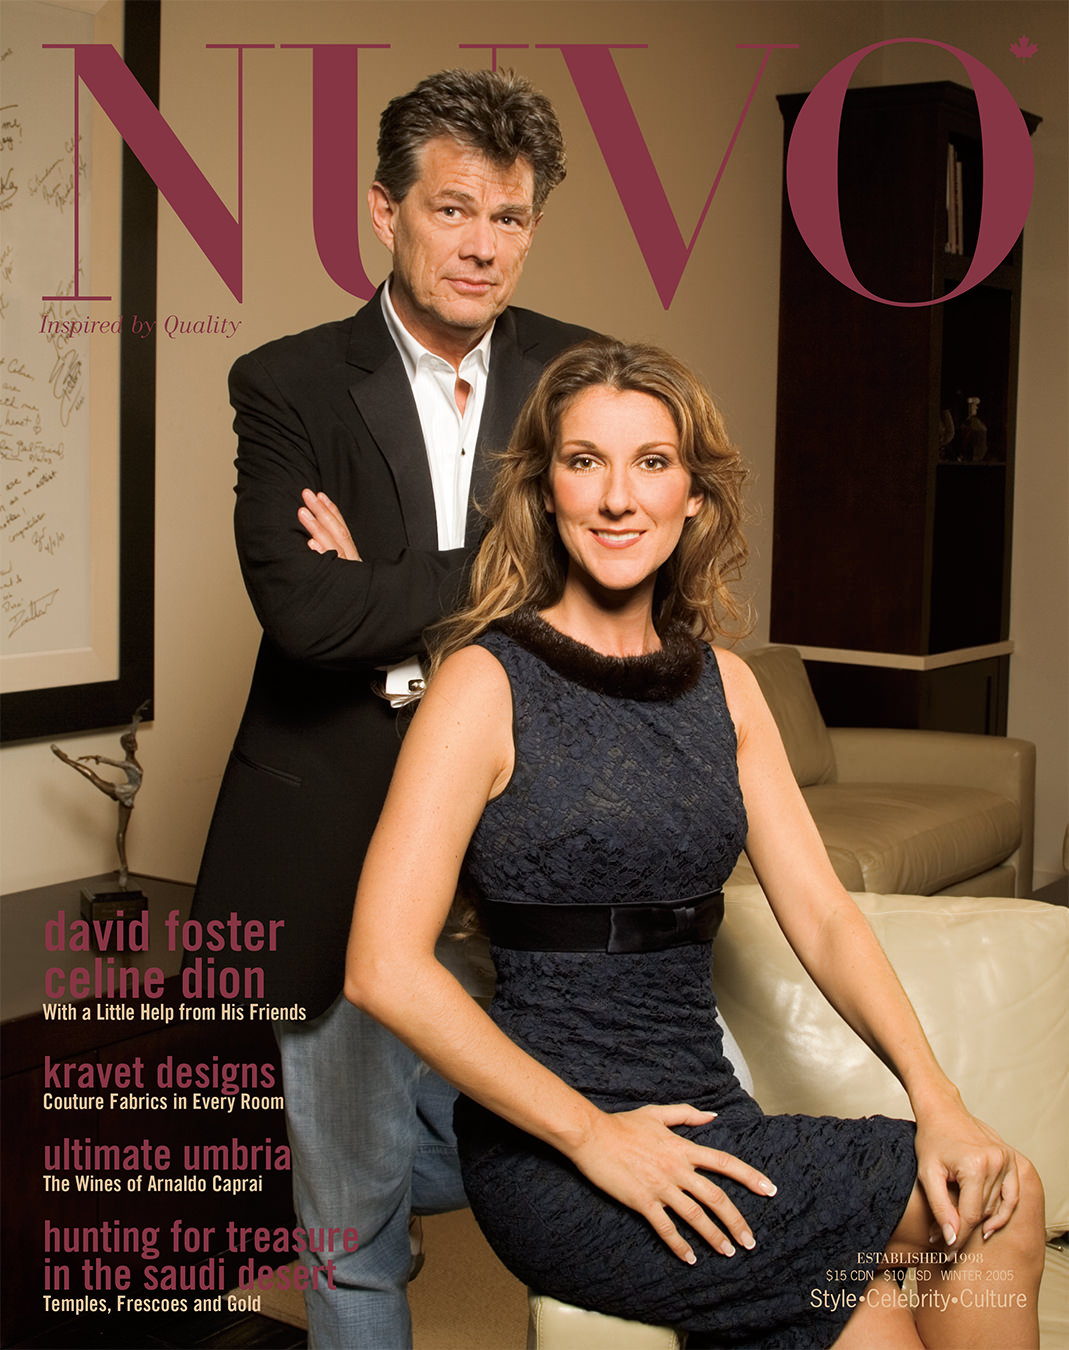 NUVO Magazine Winter 2005 Cover featuring David Foster and Celine Dion